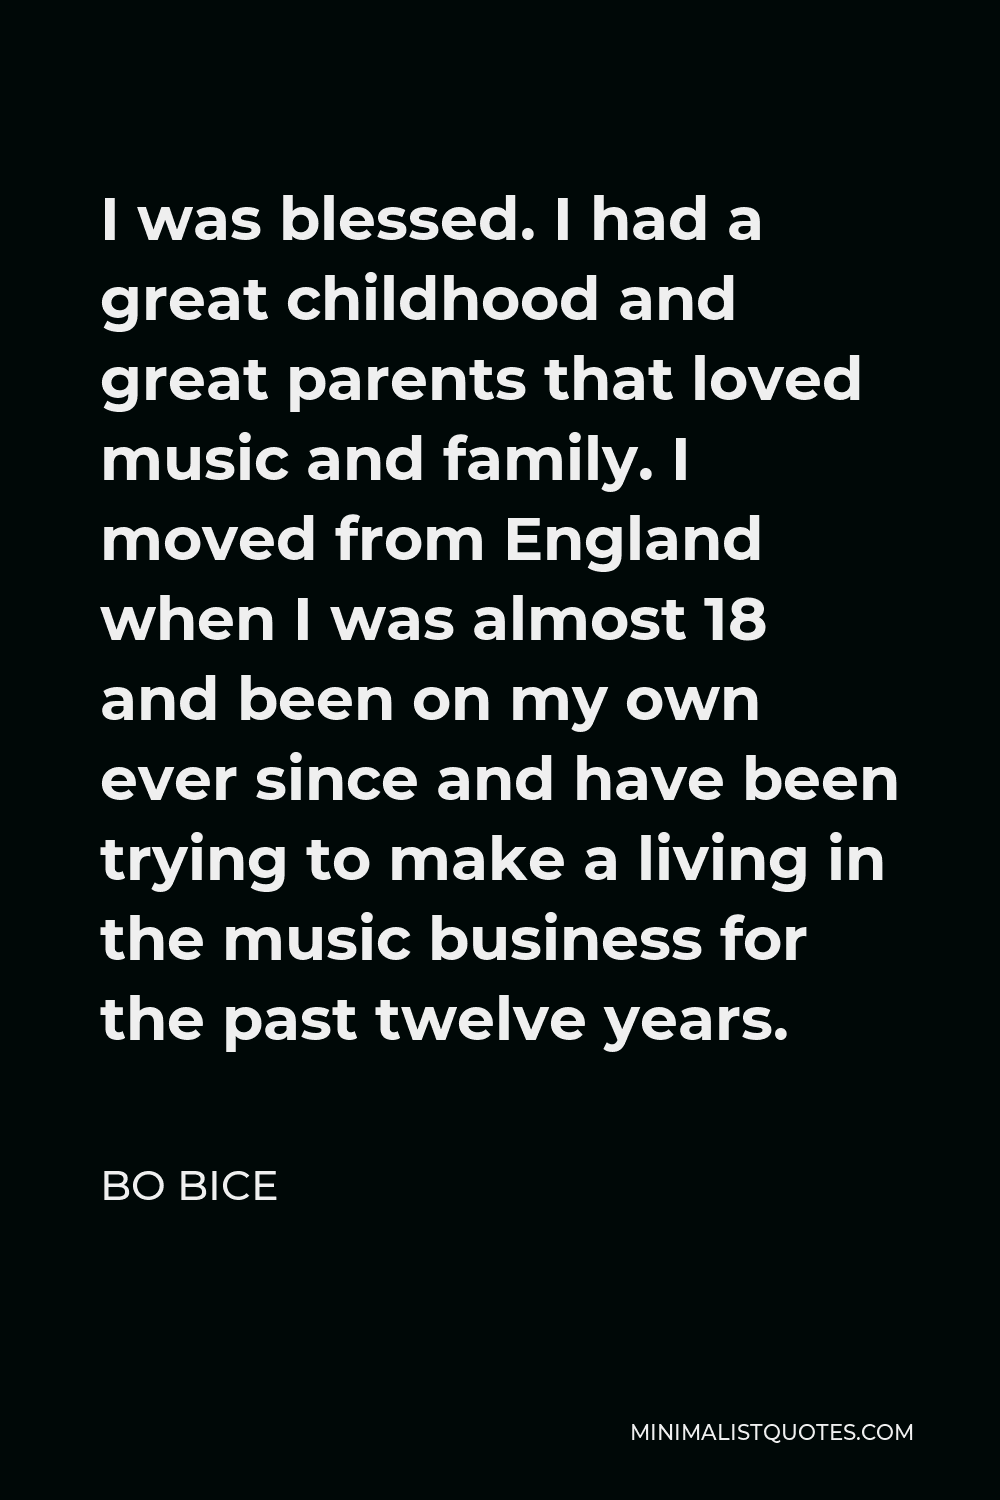 Bo Bice Quote - I was blessed. I had a great childhood and great parents that loved music and family. I moved from England when I was almost 18 and been on my own ever since and have been trying to make a living in the music business for the past twelve years.